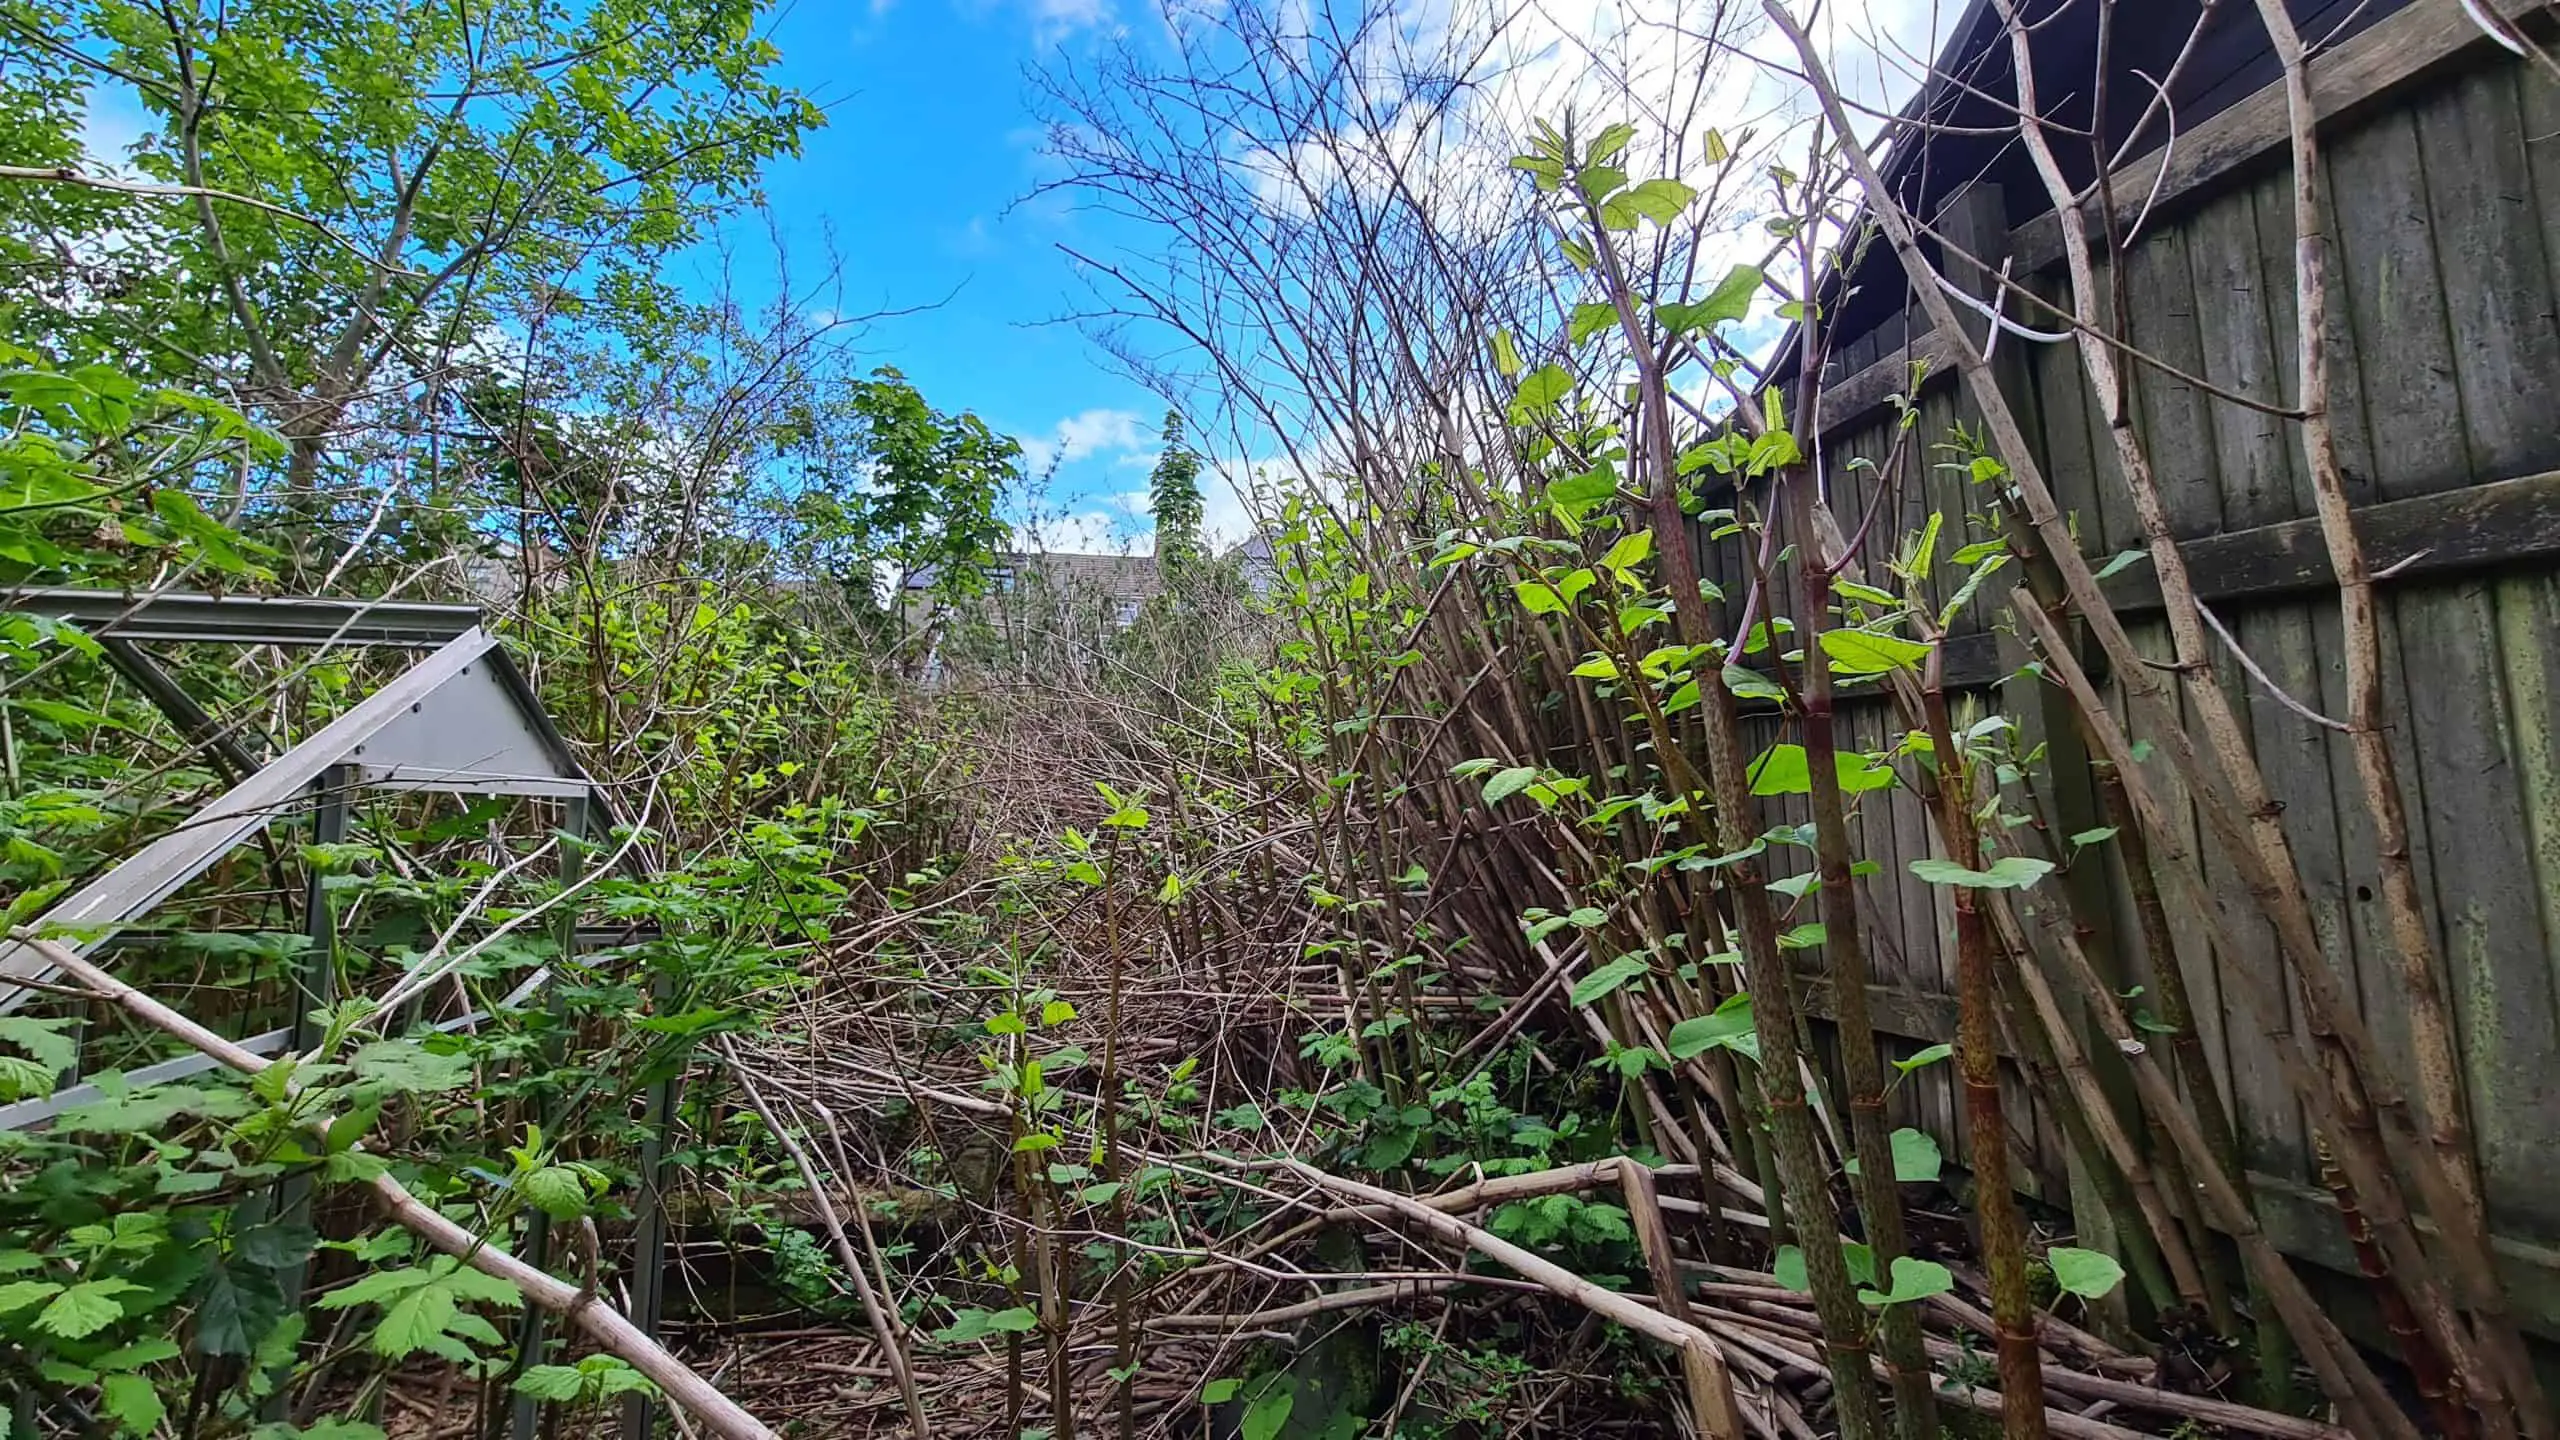 Become familiar with Japanese Knotweed UK law and how it will affect you if you have Japanese knotweed on your property